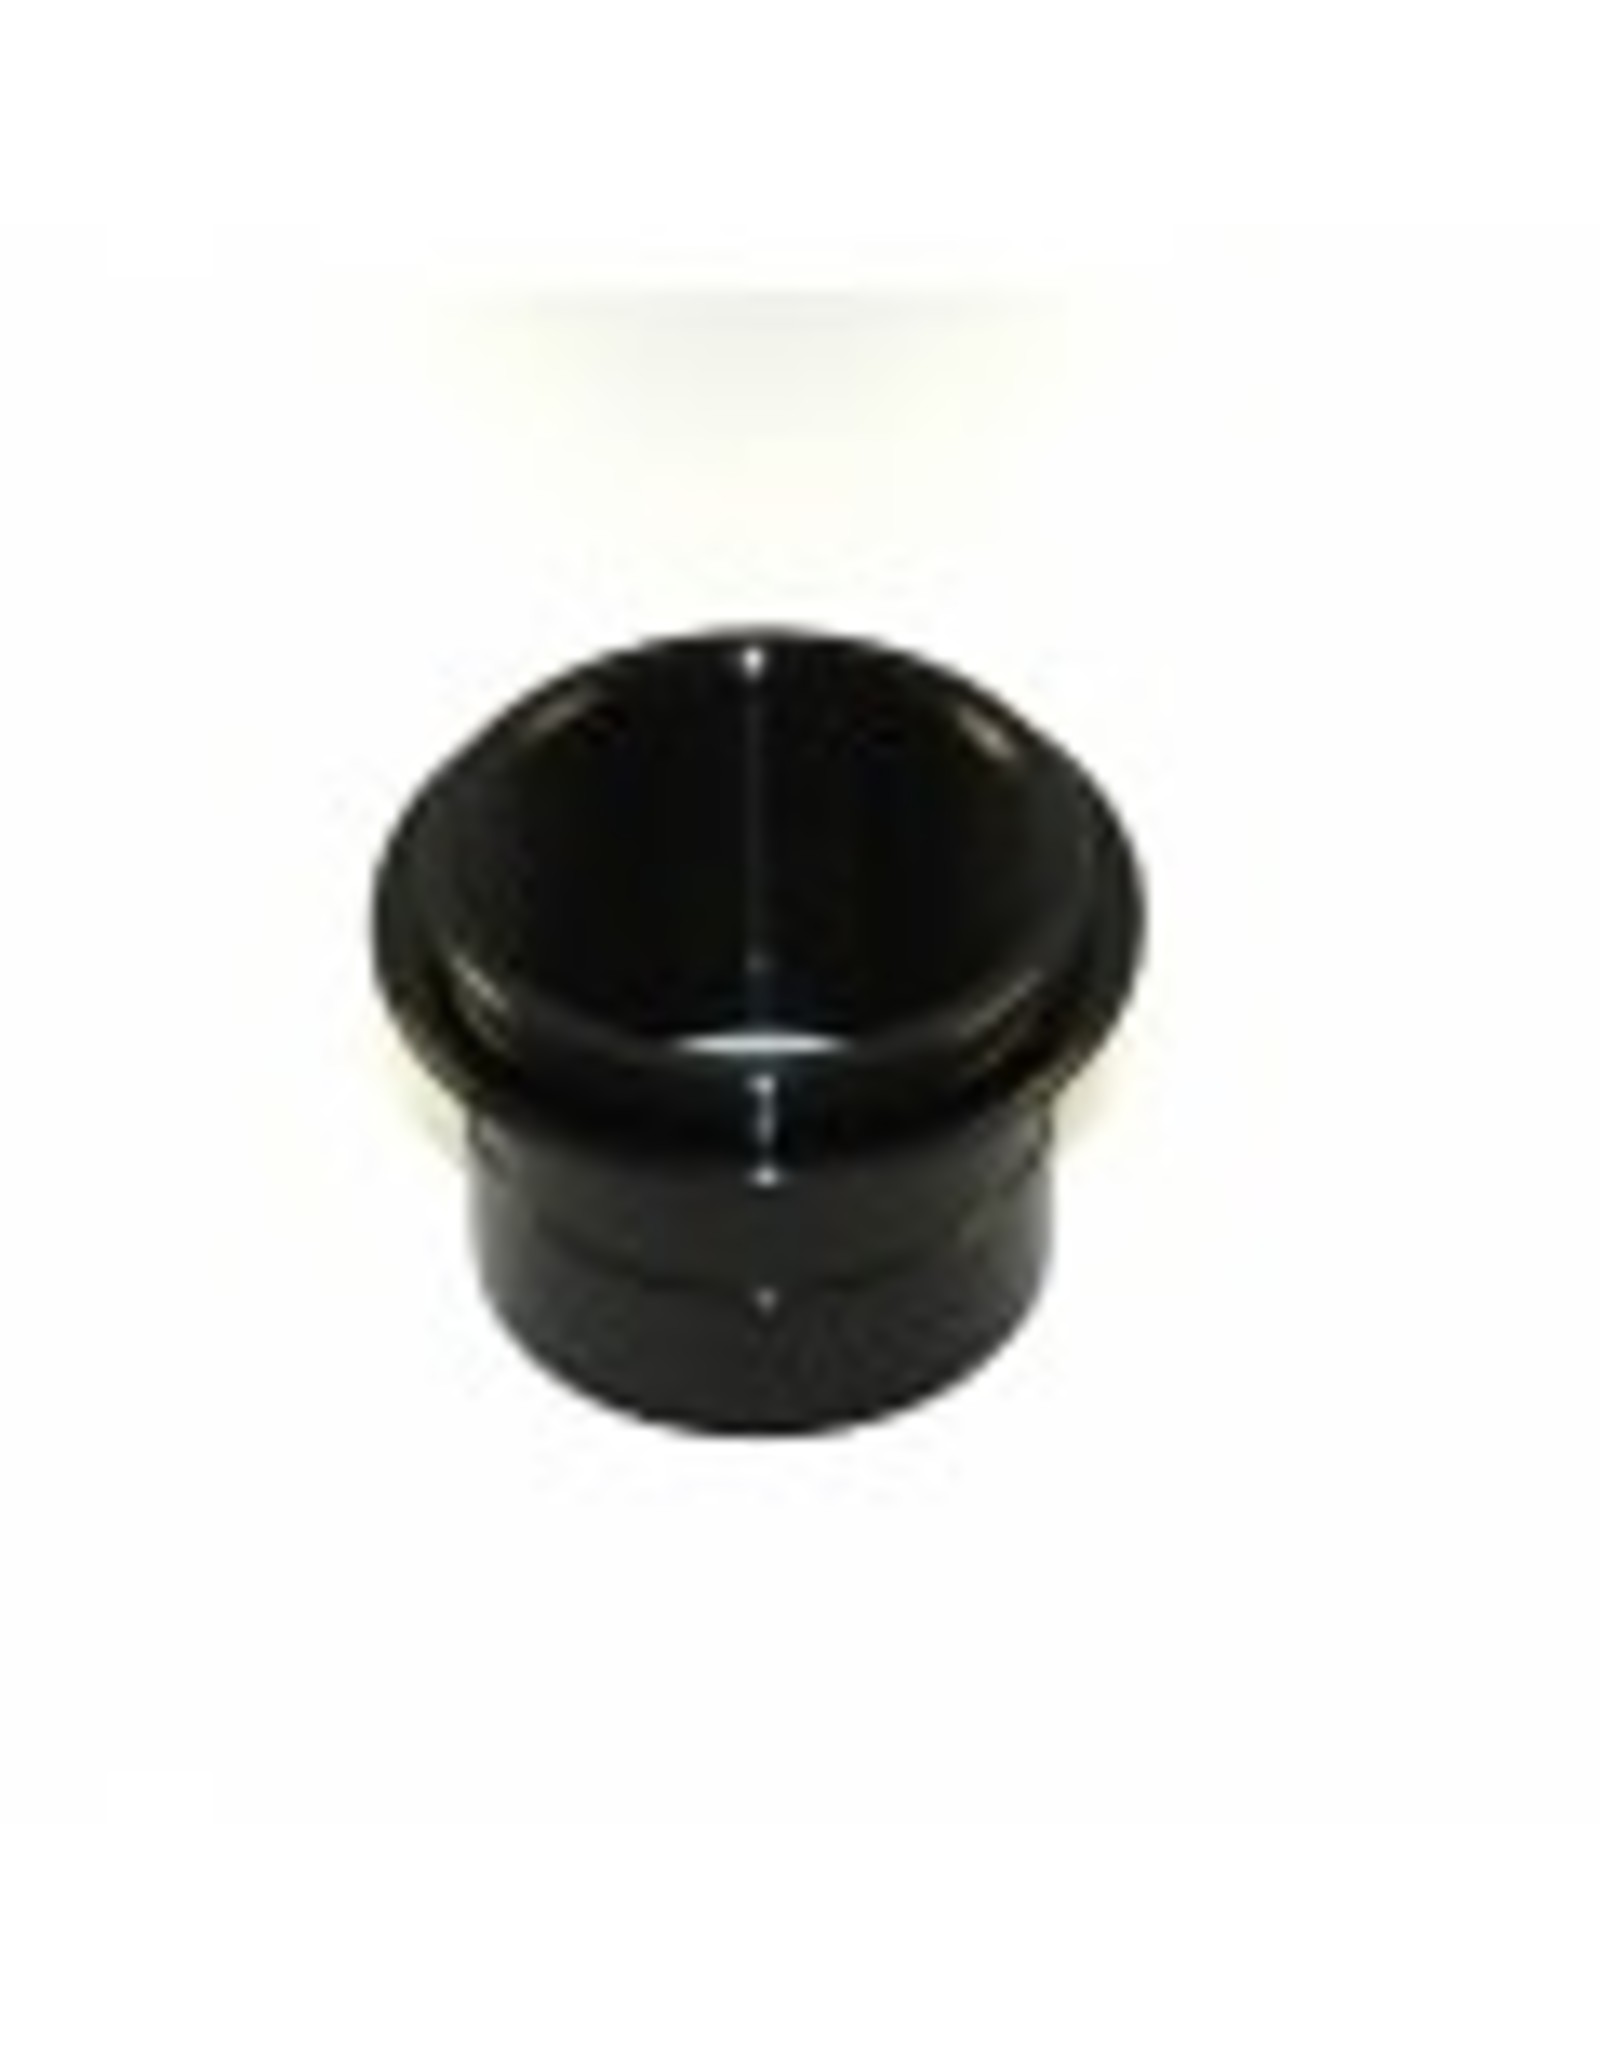 Feathertouch Feathertouch A20-287A--2.0" Adapter to attach Orion 0.85 focal reducer